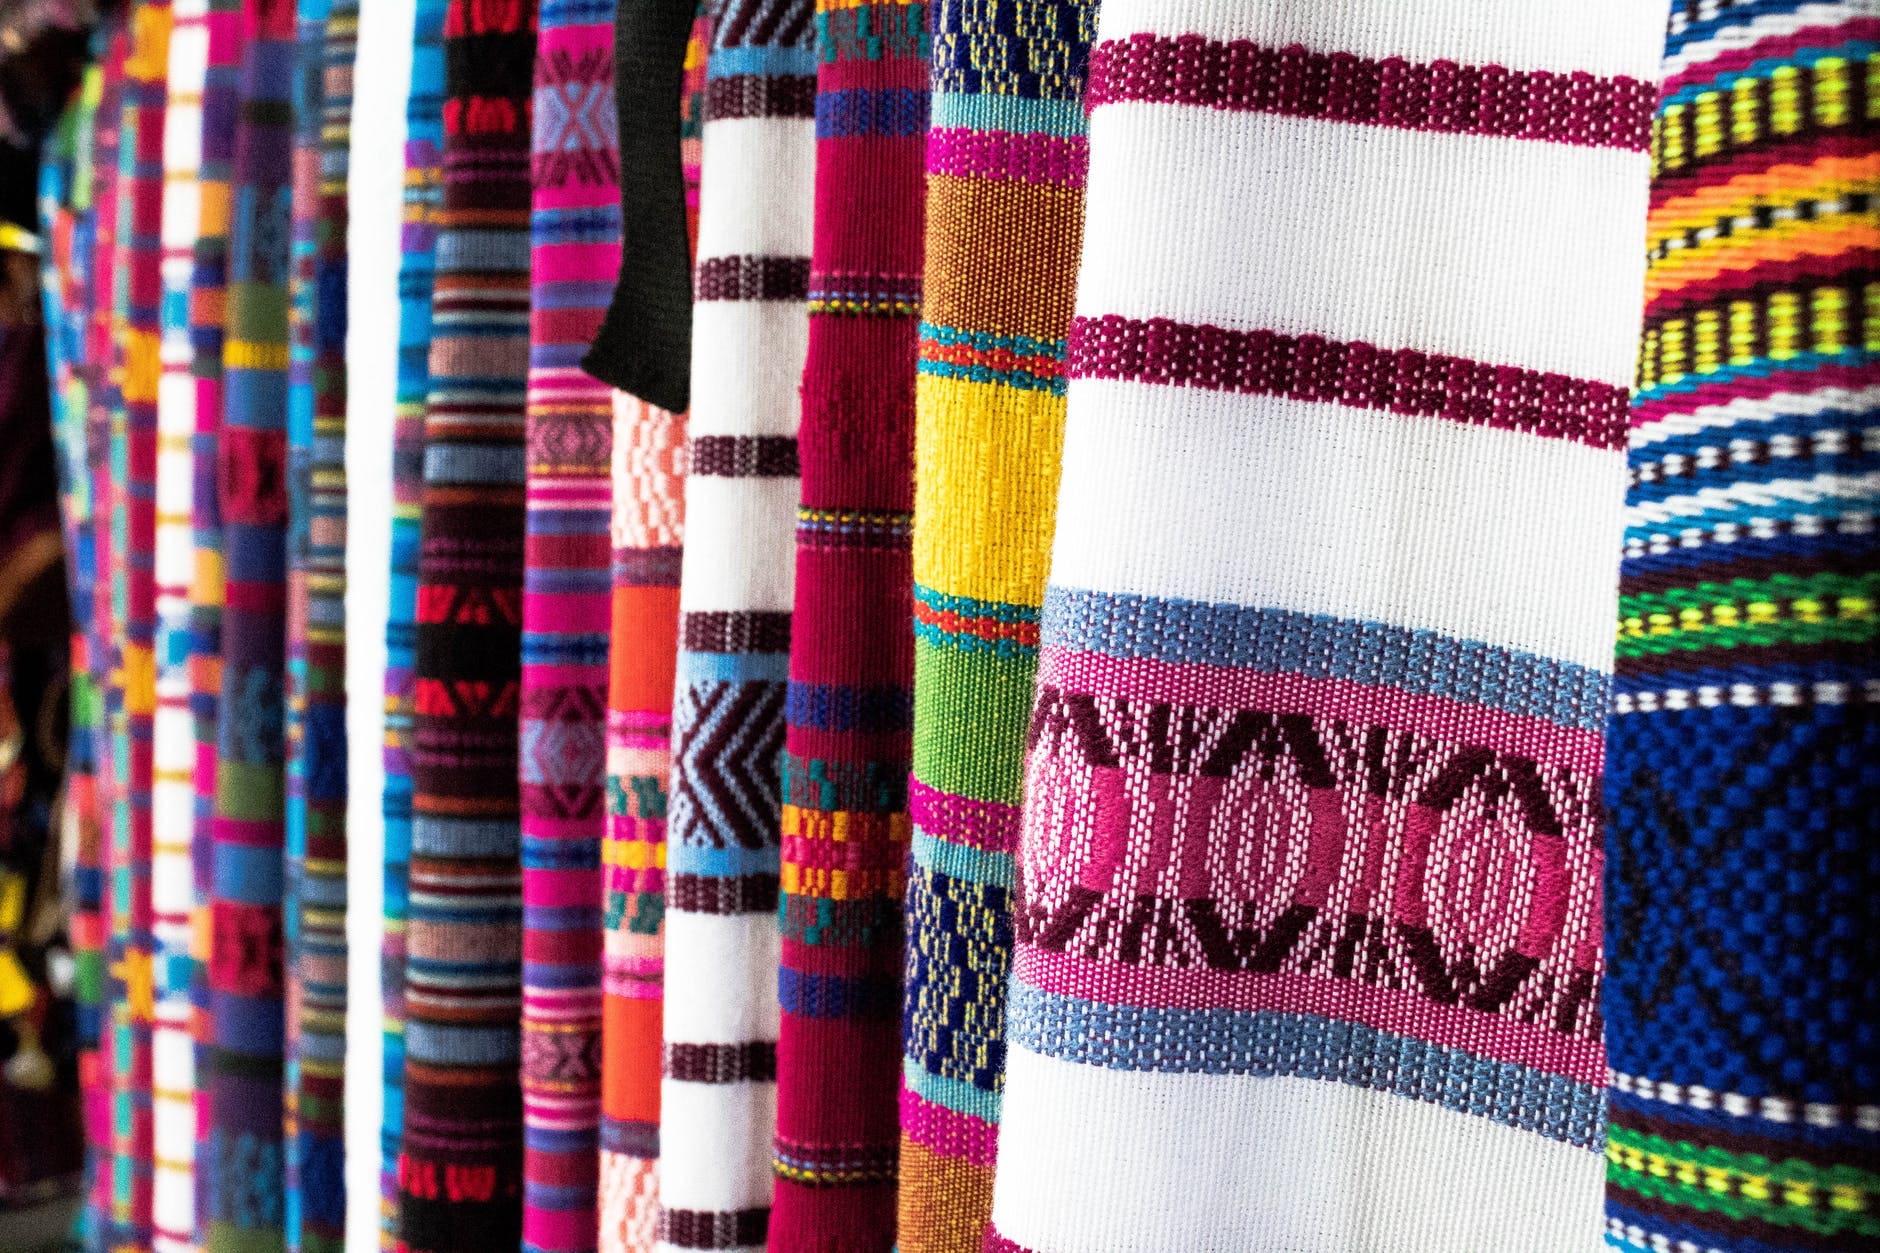 Photo of assorted textiles by Kiara Coll for Pexels